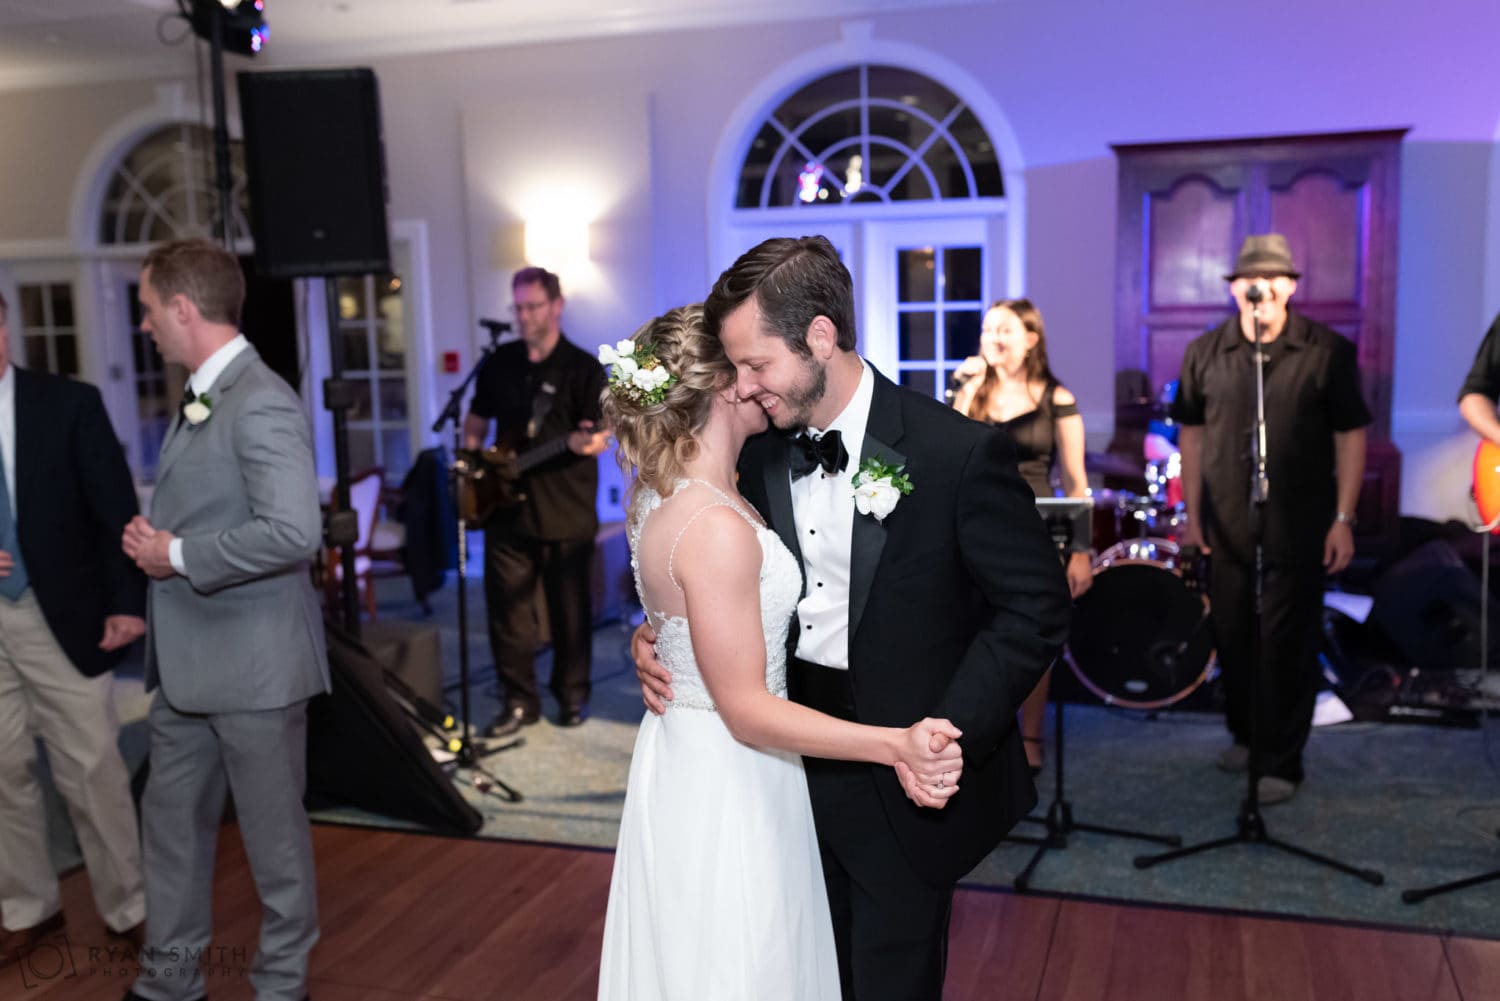 Bride and groom dancing at end of reception Wachesaw Plantation